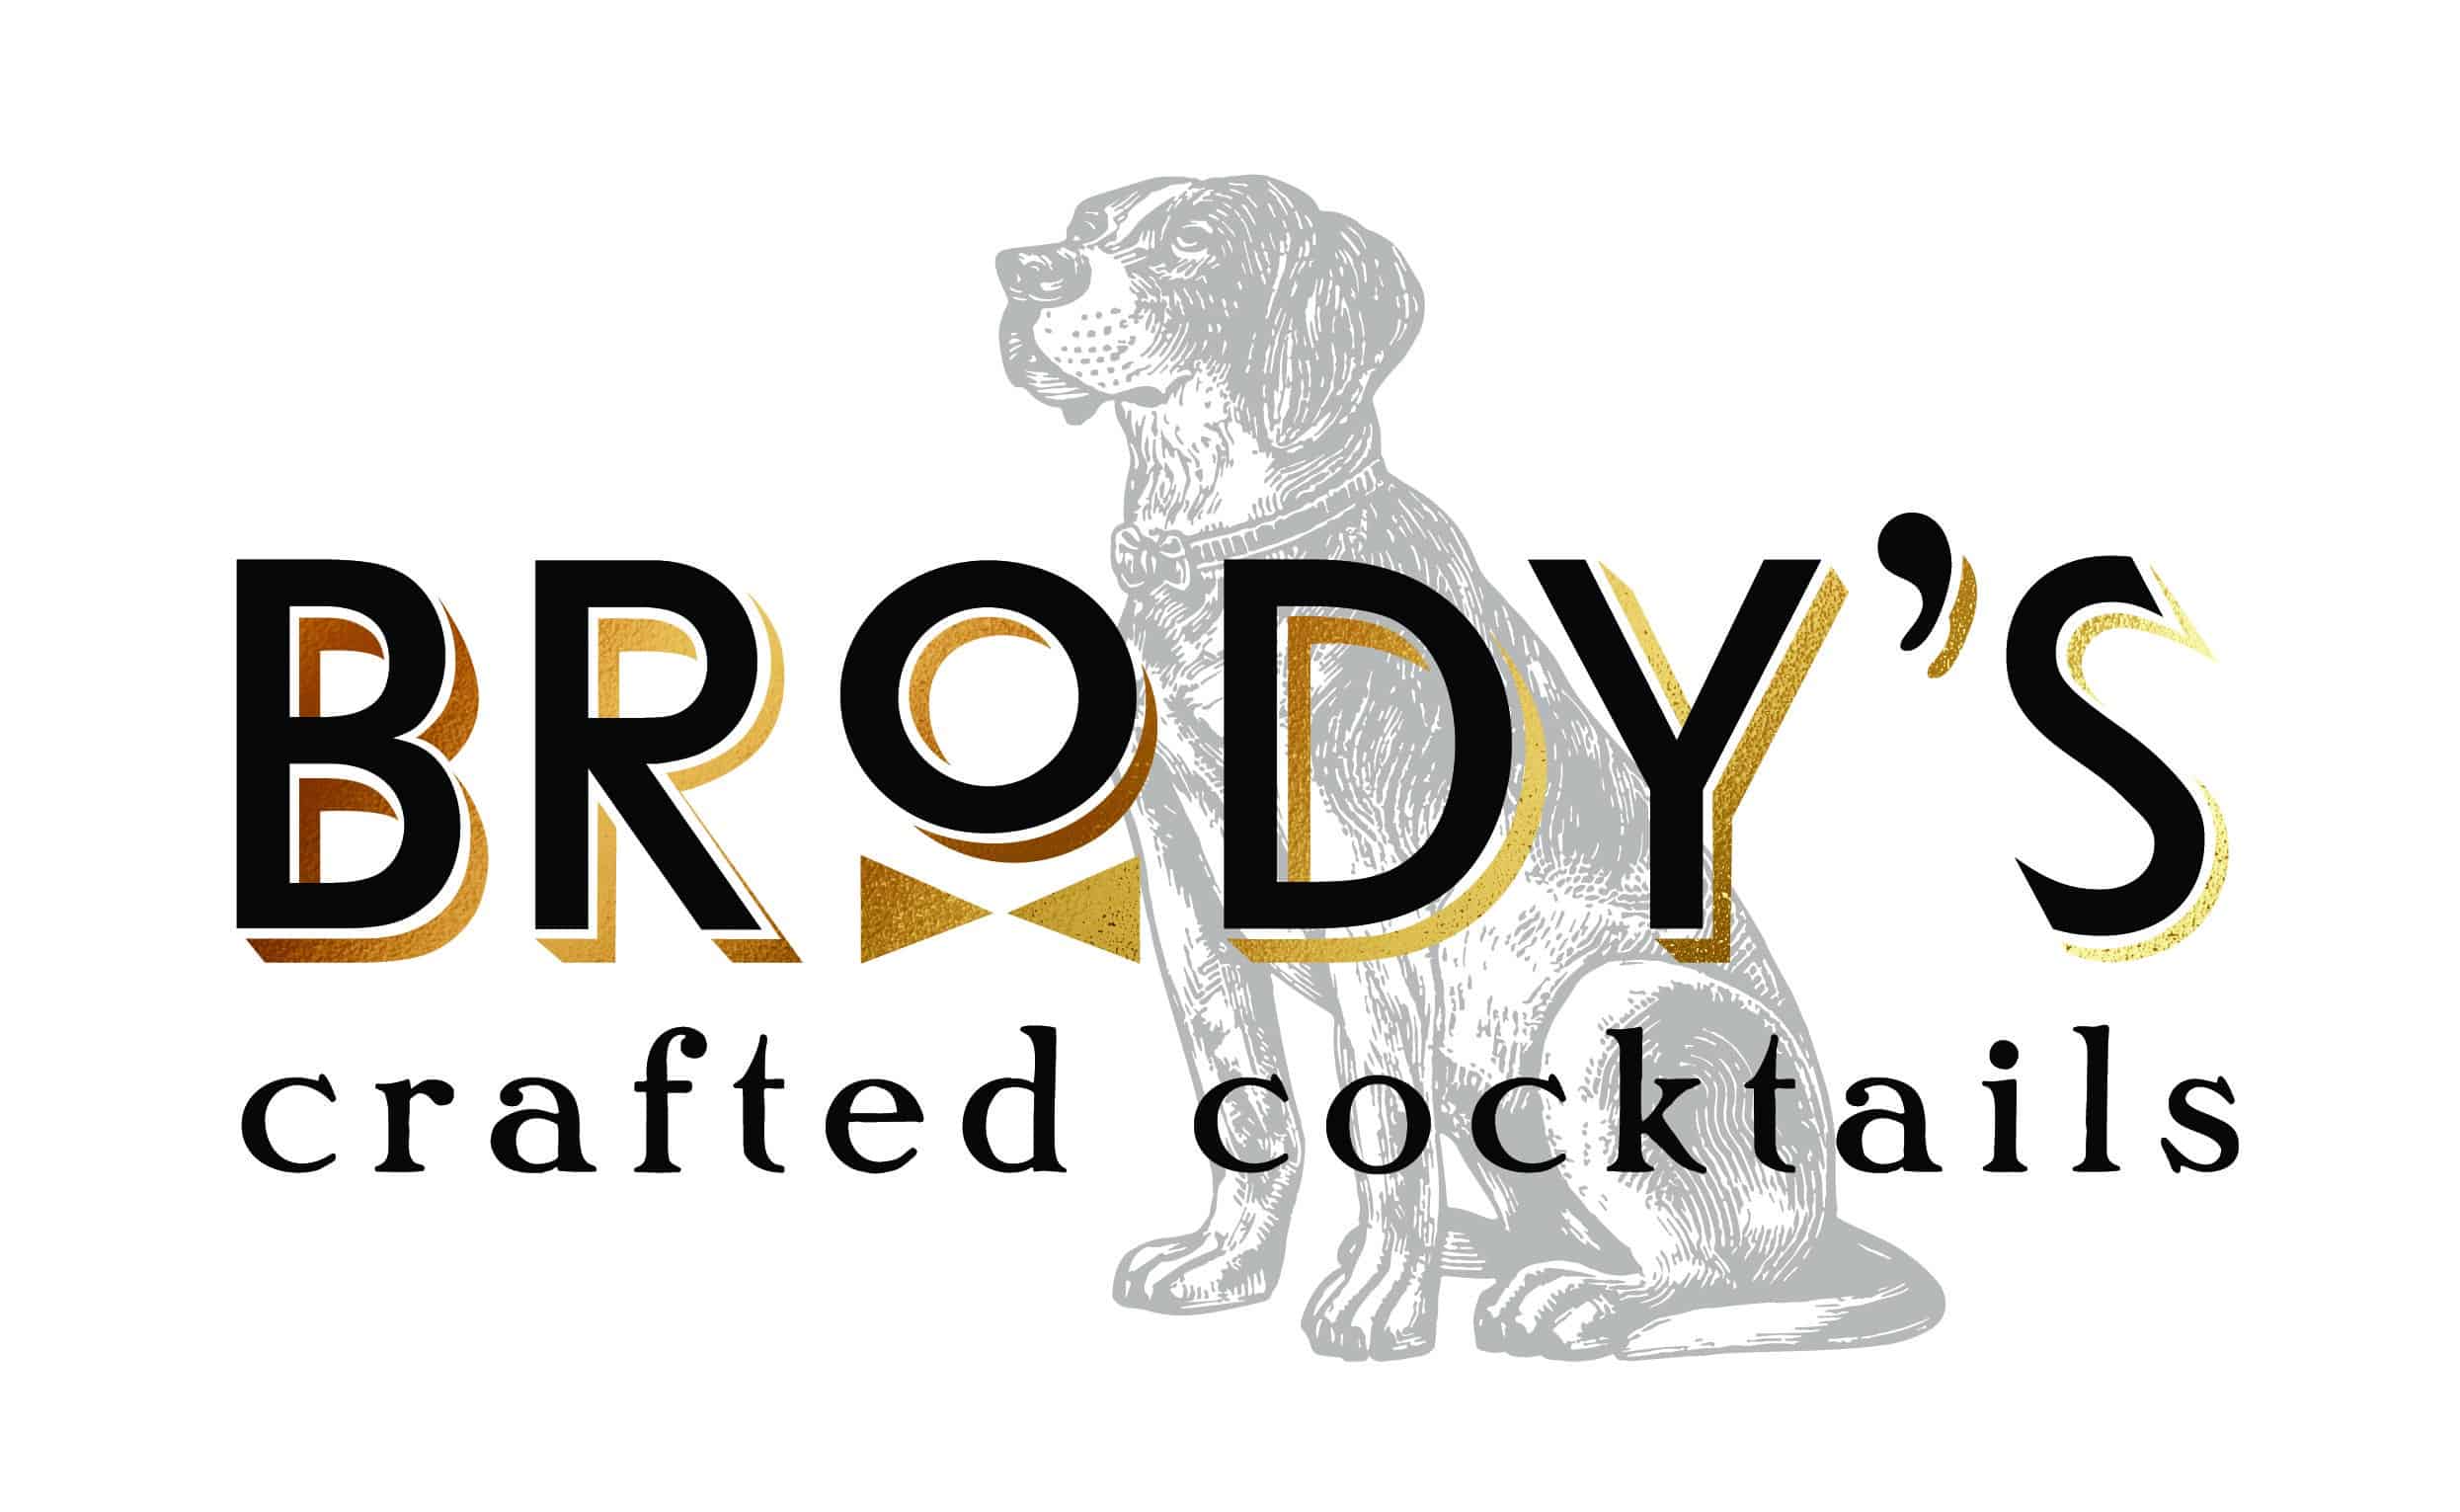 Brody’s Crafted Cocktails